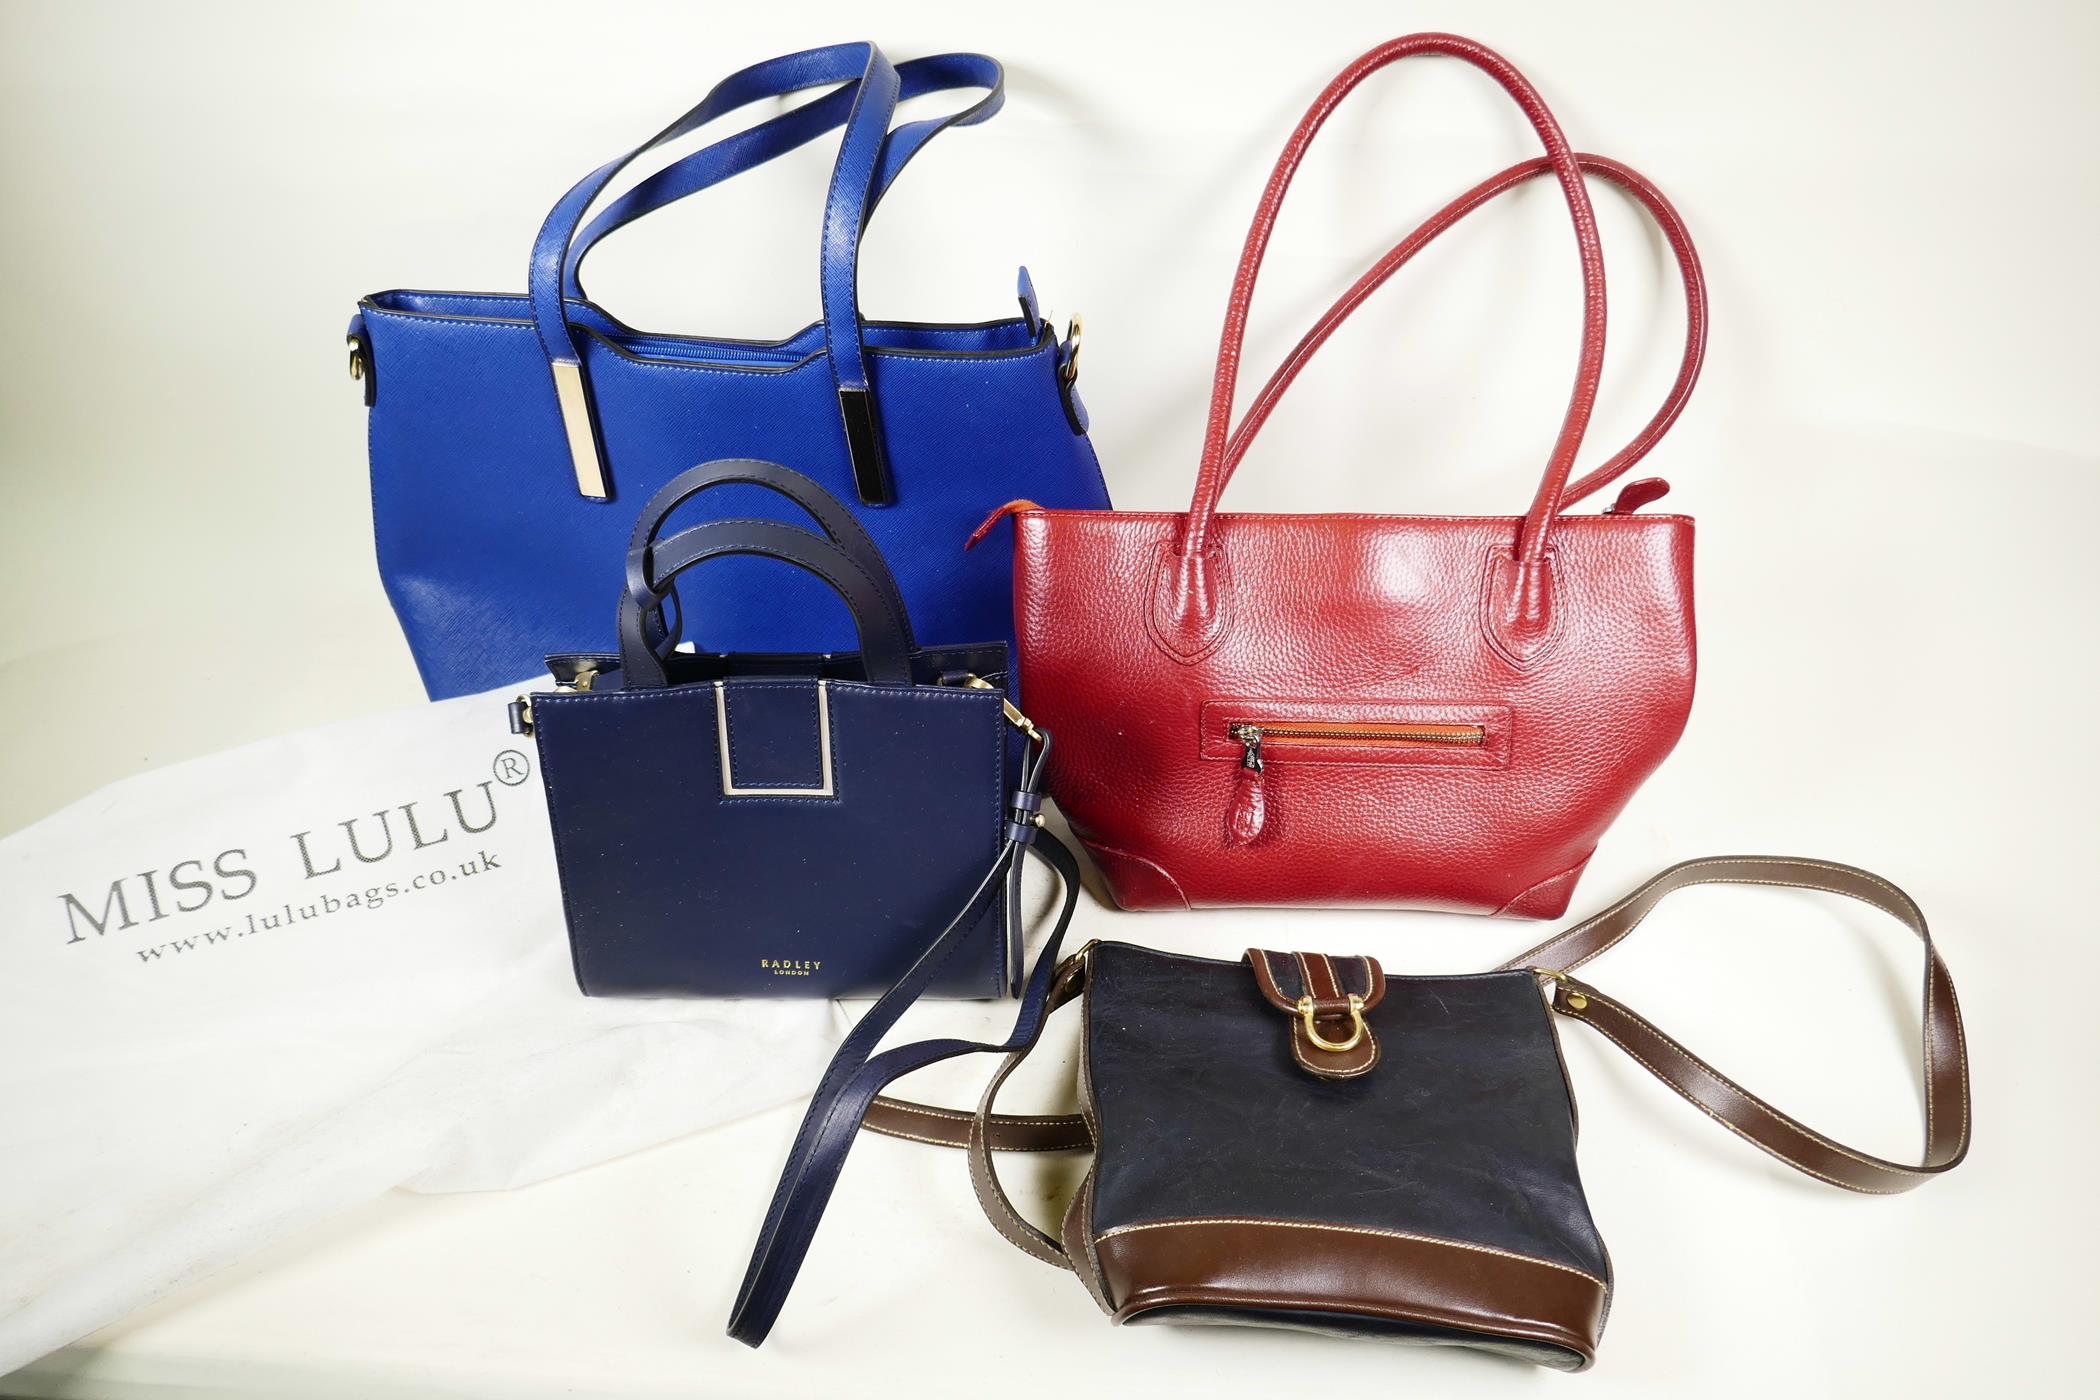 Four contemporary leather and faux leather handbags, including a new navy leather Radley small